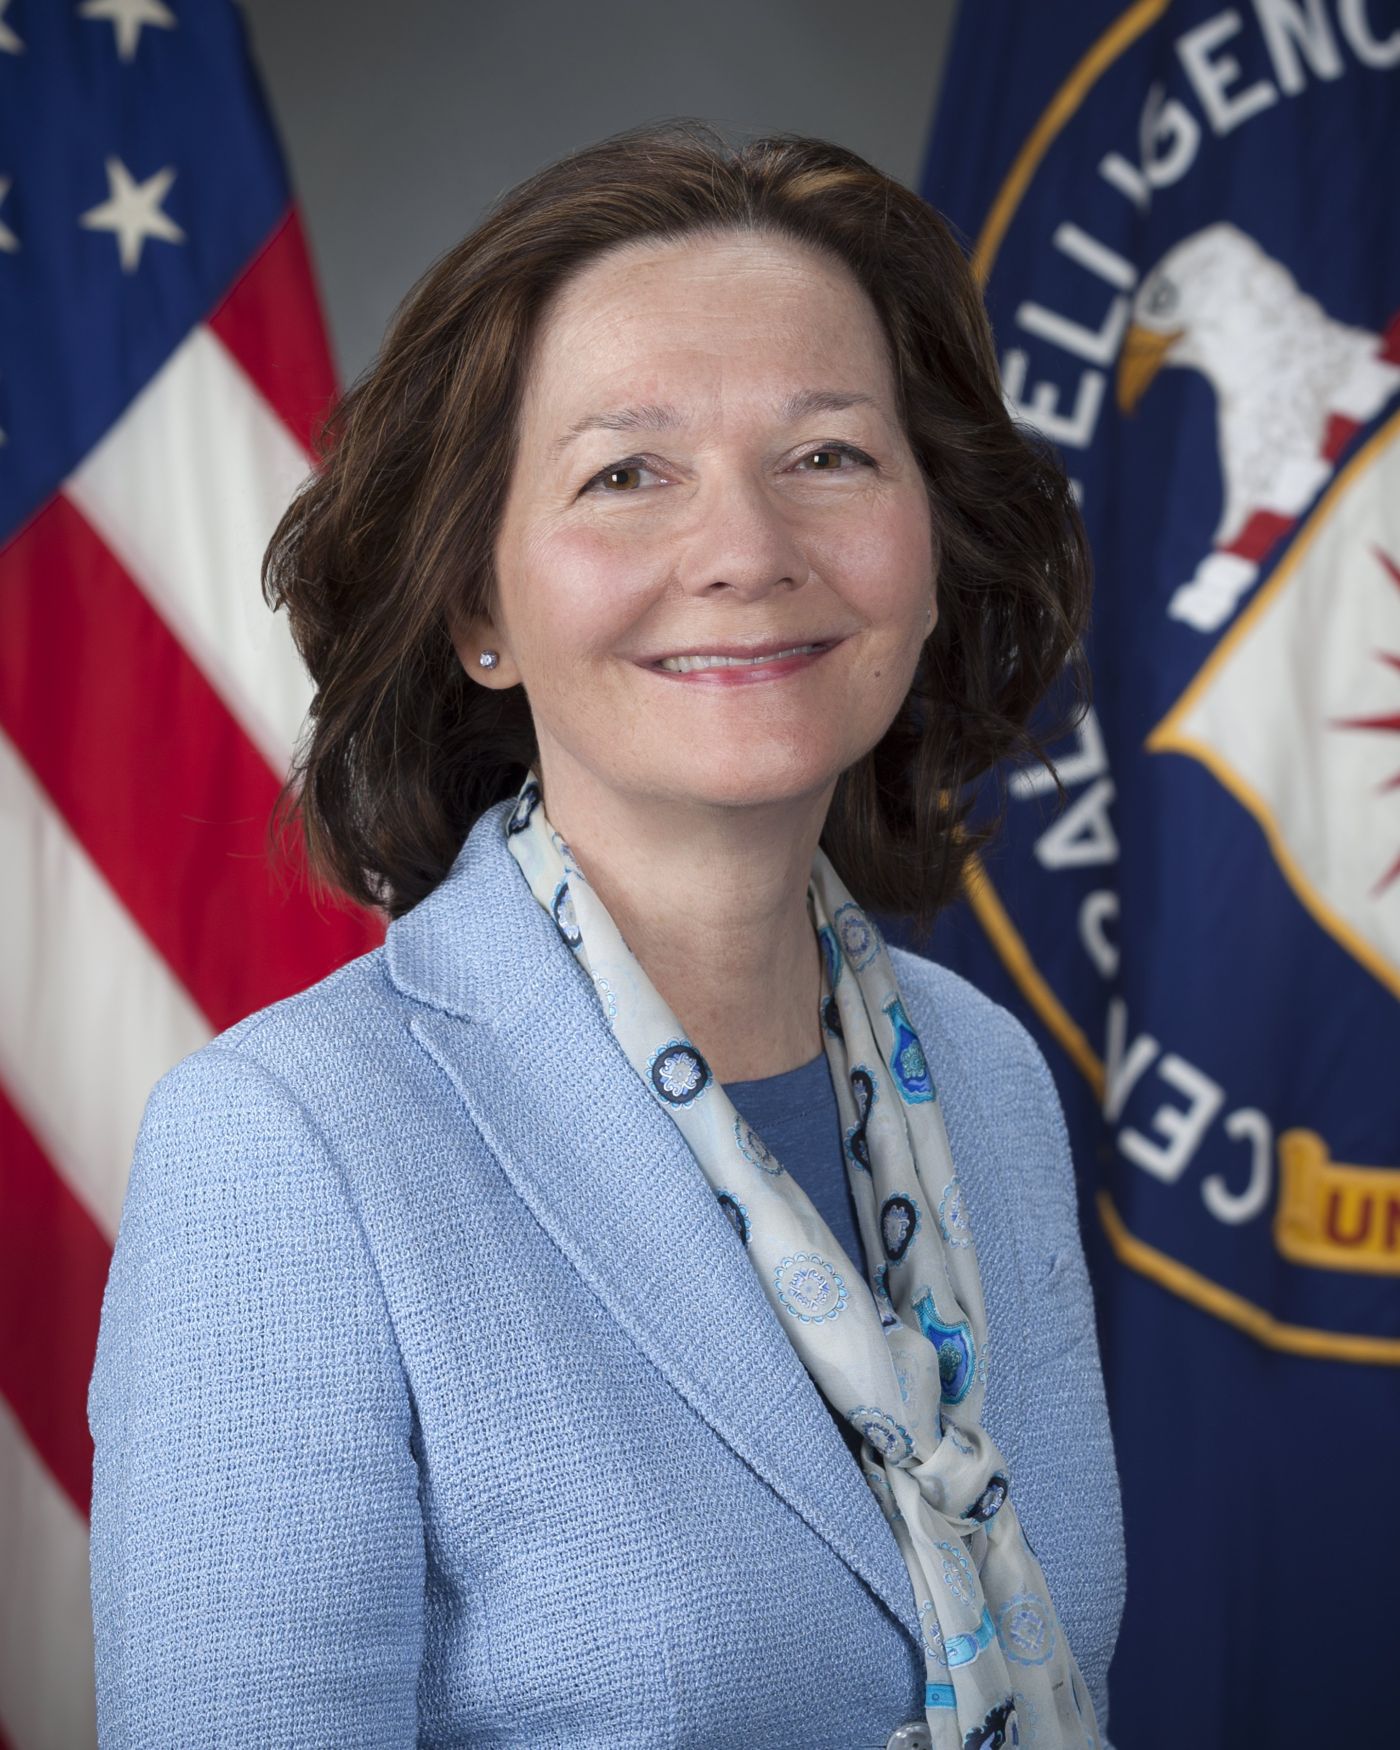 epa06601051 A handout photo made available by the Central Intelligence Agency shows Gina Haspel, Langley, Virginia, USA, 21 March 2017 (issued 13 March 2018). Gina Haspel has been named by US President Donald J. Trump as CIA director, replacing Mike Pompeo who will replace Rex Tillerson as Secretary of State. Both are subject to Senate confirmation. EPA/HANDOUT HANDOUT EDITORIAL USE ONLY/NO SALES